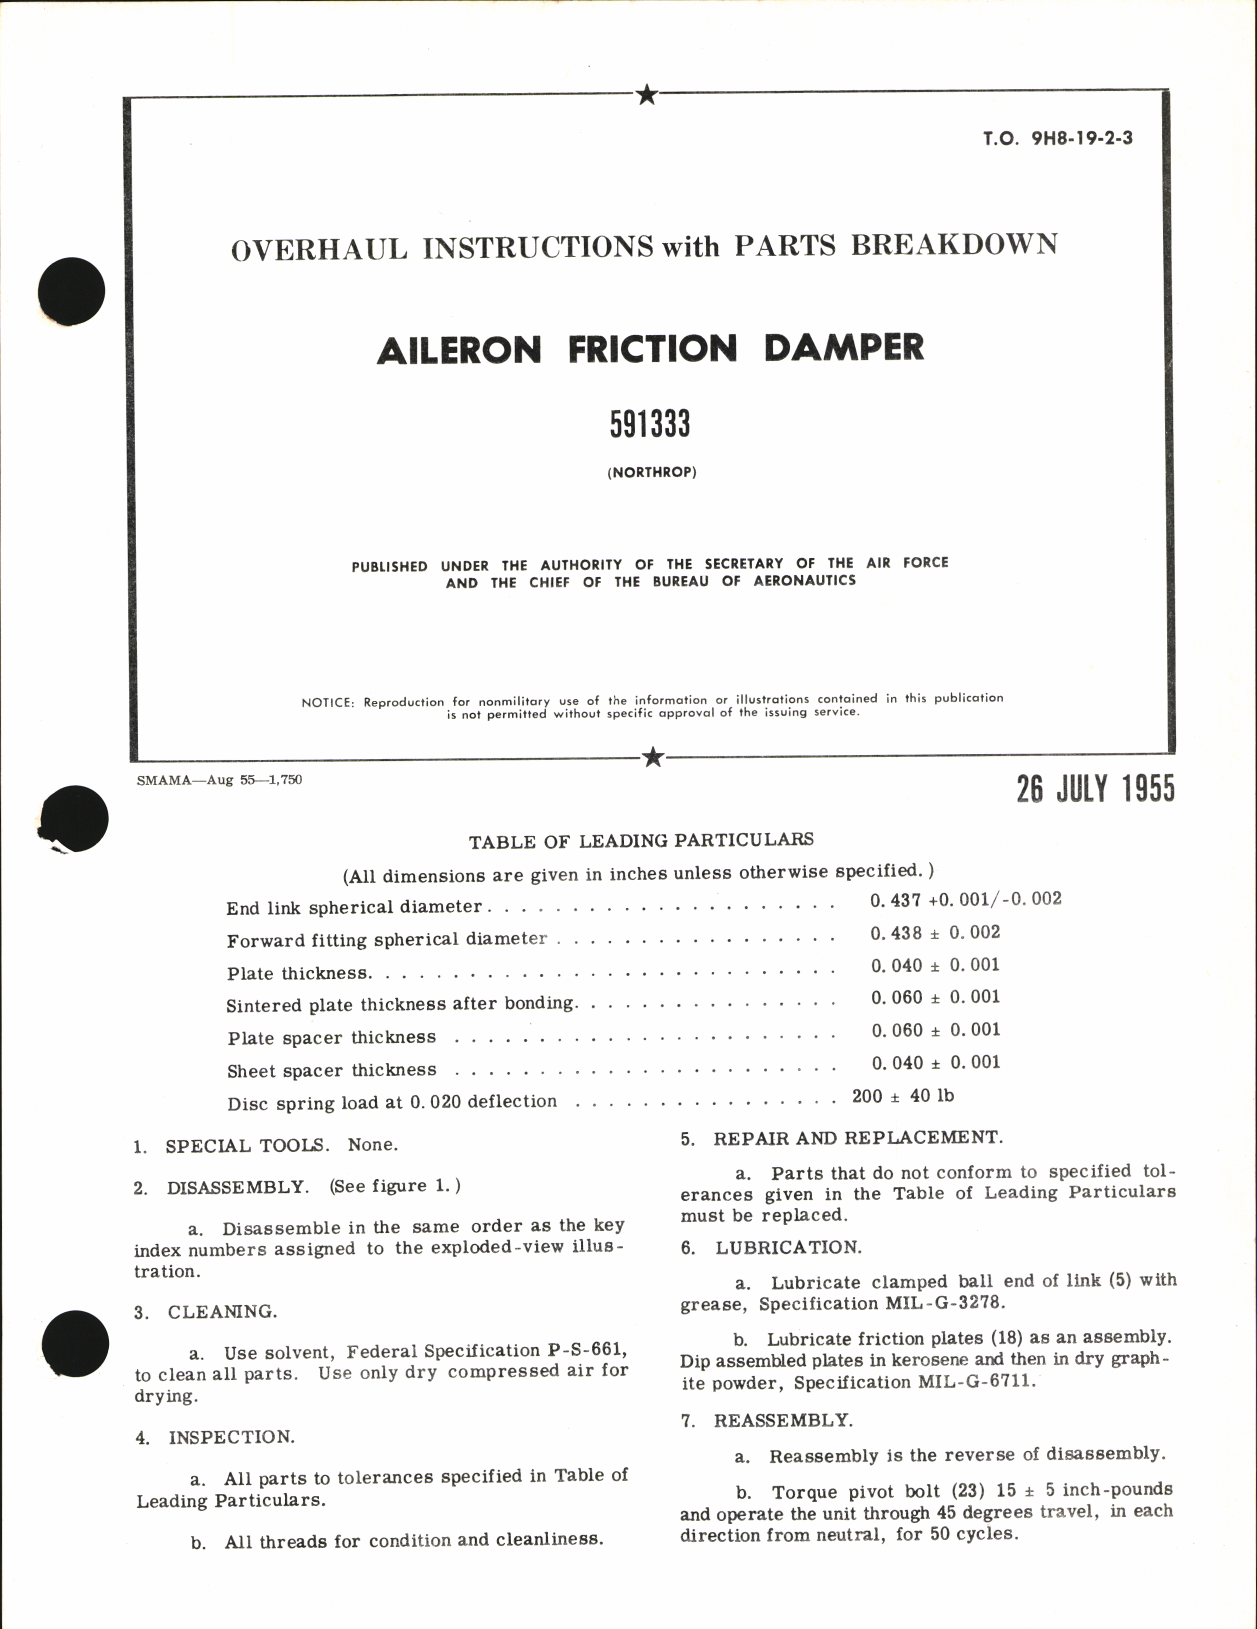 Sample page 1 from AirCorps Library document: Overhaul Instructions with Parts Breakdown for Aileron Friction Damper 59133